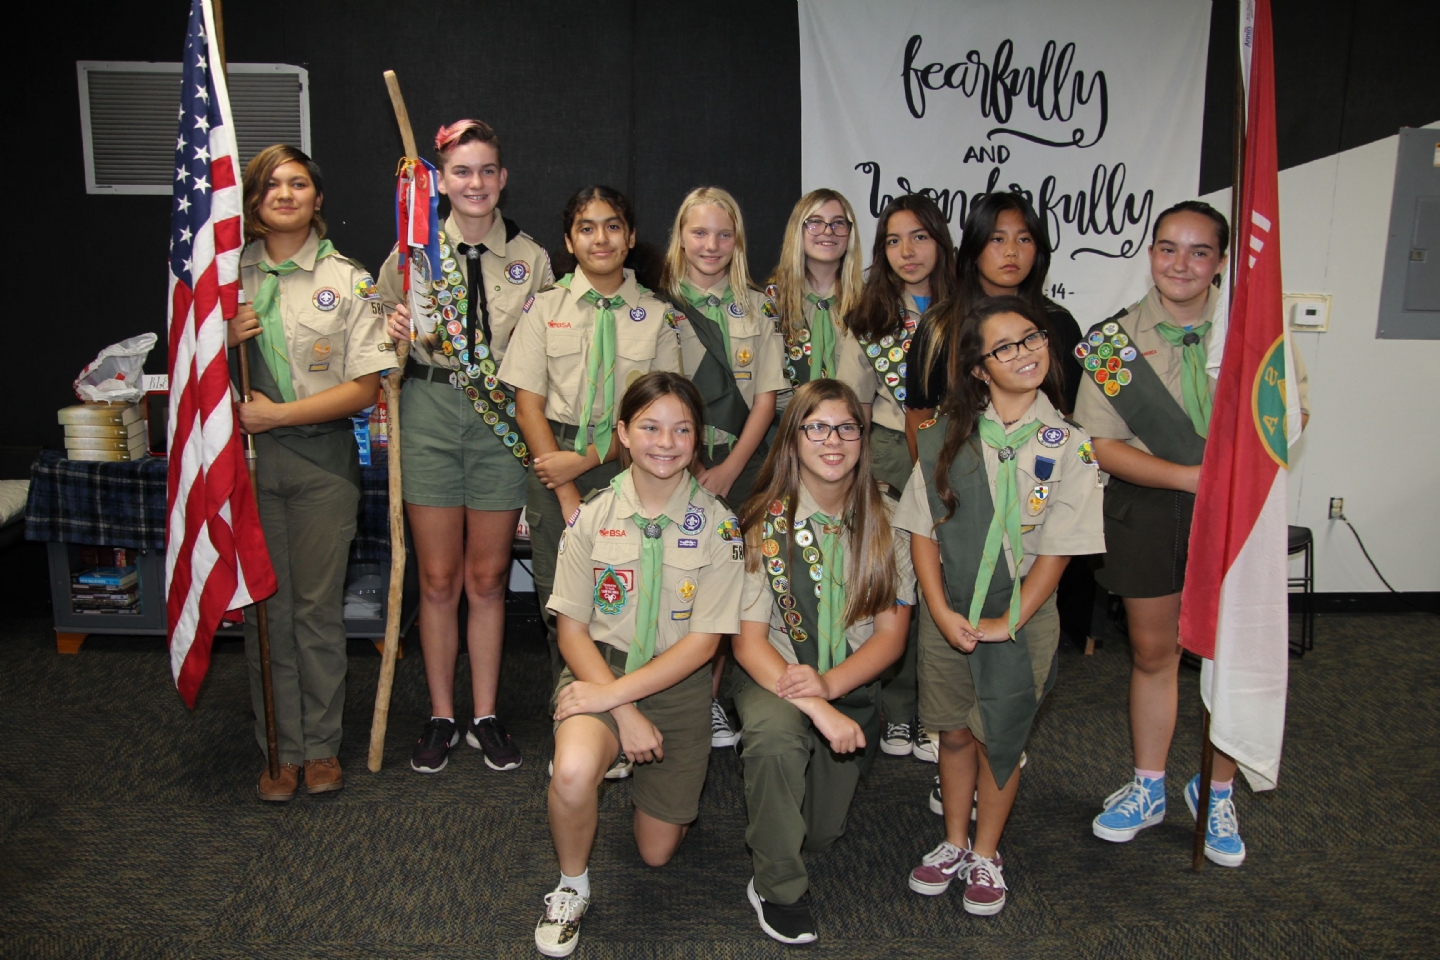 Members of VFW Post 1956 attended BSA Girls Troop 584 Court of Honor on August 25 2022.  Scouts were honored for Rank Advancement, Awards of Merit, Years of Service and Merit Badges earned. Troop 584 is chartered by Post 1956.    